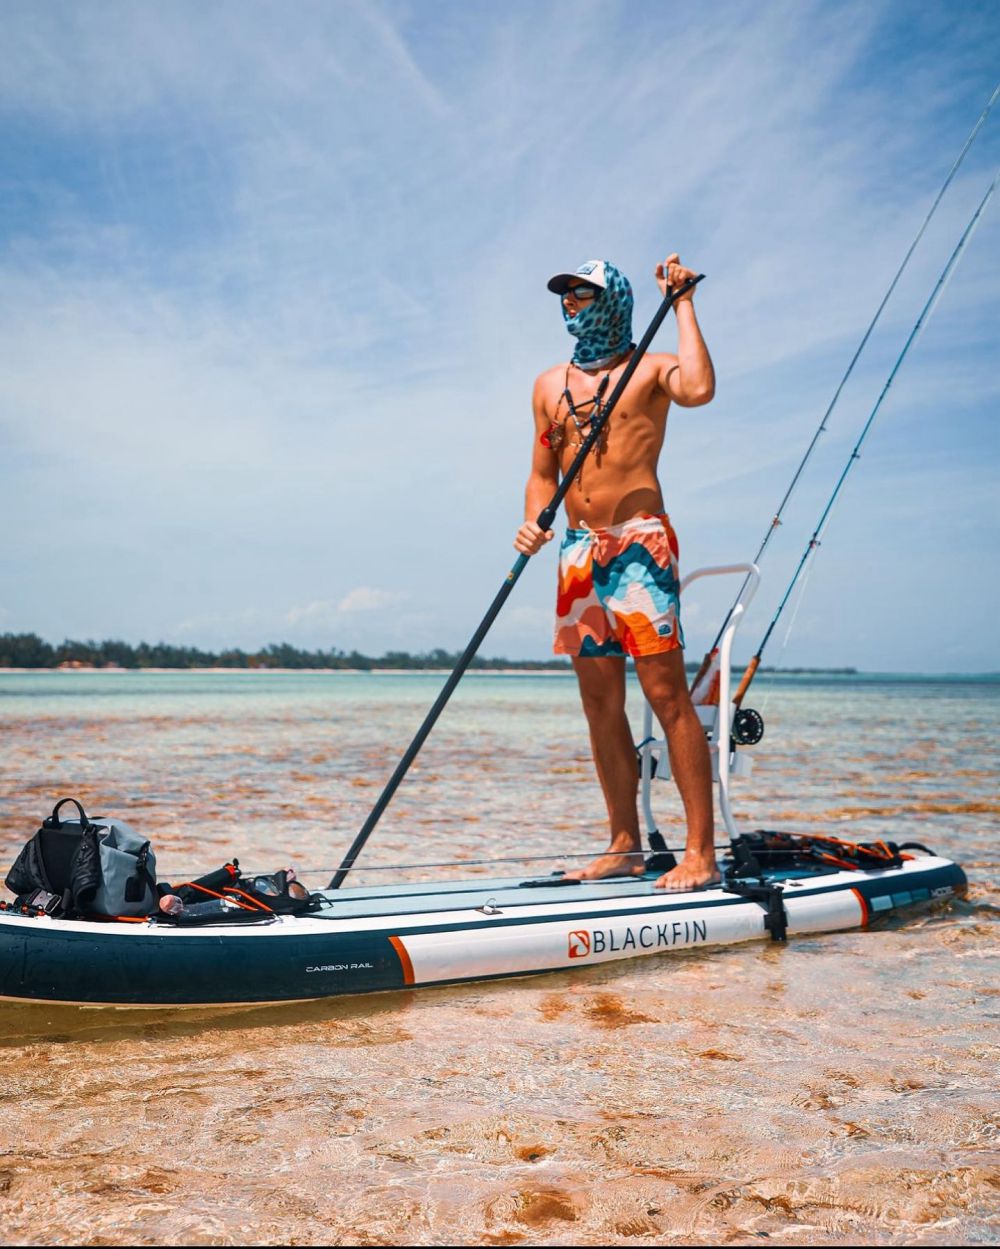 Types of Paddle Boarding Activities